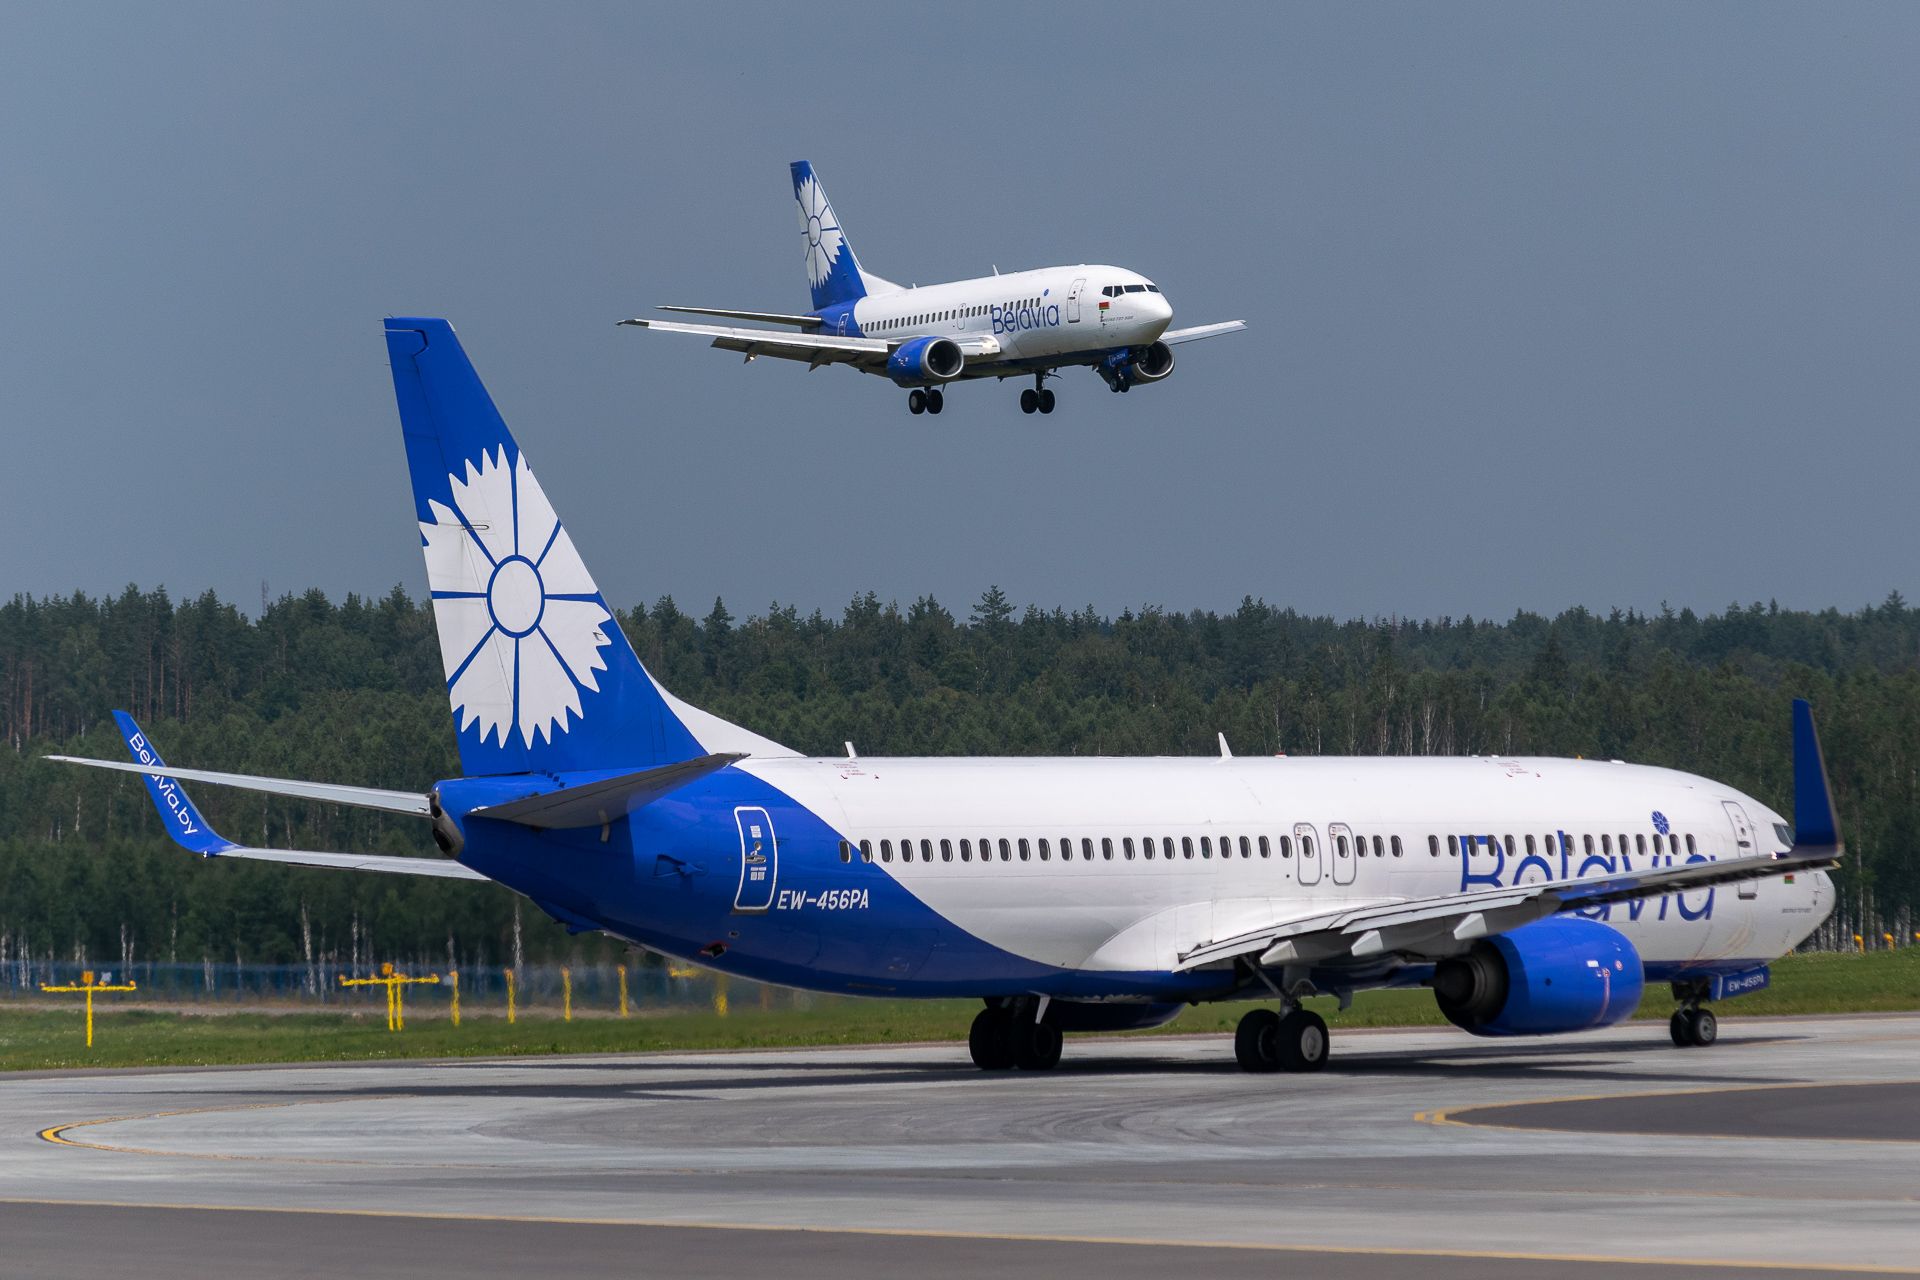 Two Belavia Boeing 737s, one about to land and the other waiting to take off.